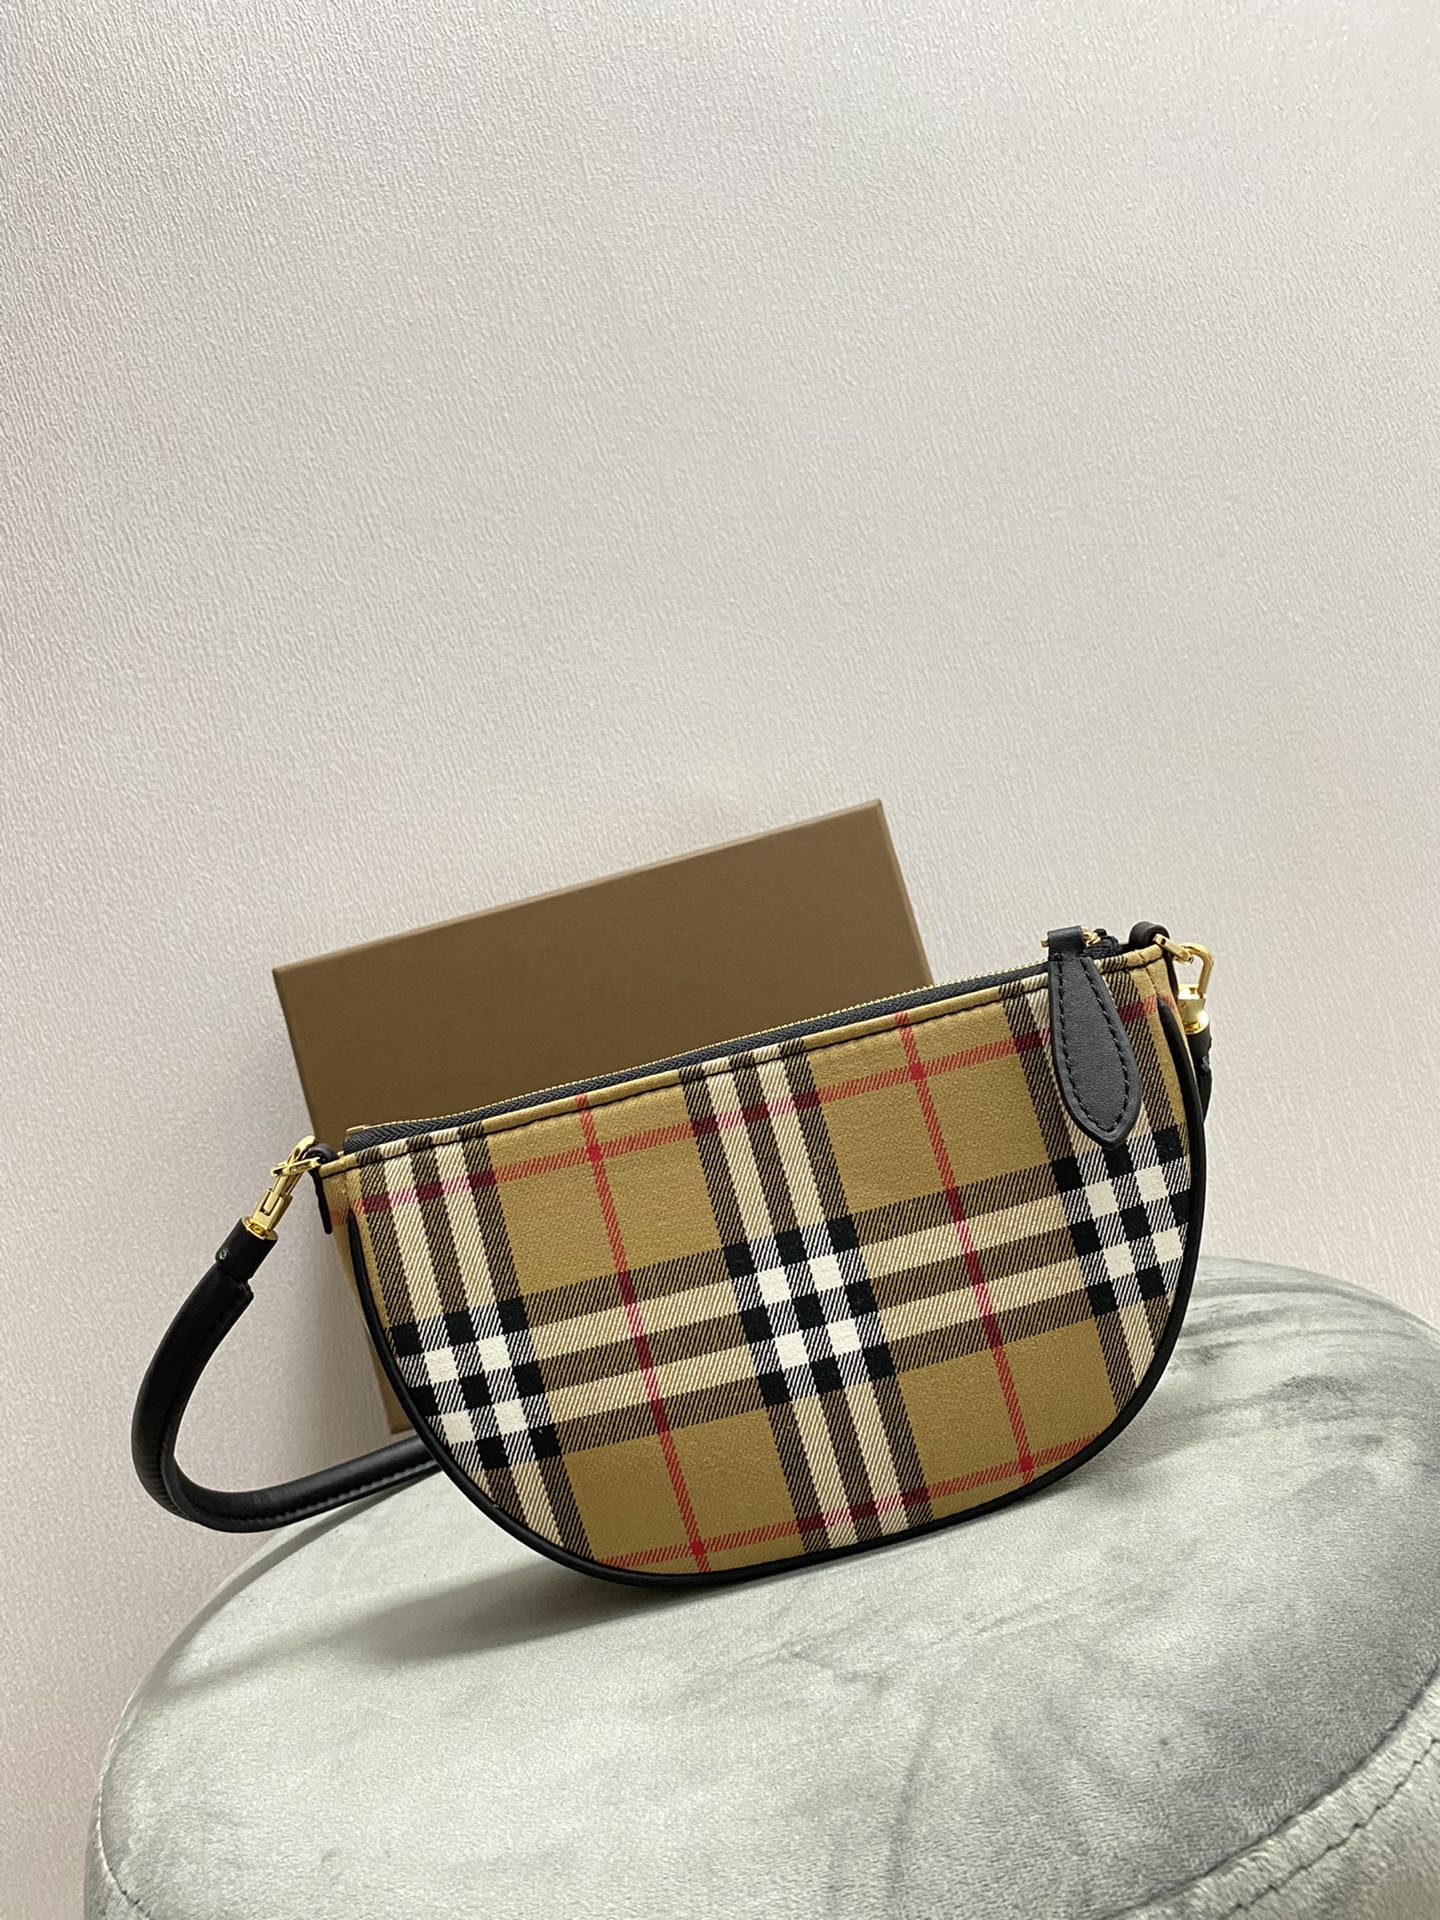 Burberry Olympia Pouch Bag – ZAK BAGS ©️ | Luxury Bags